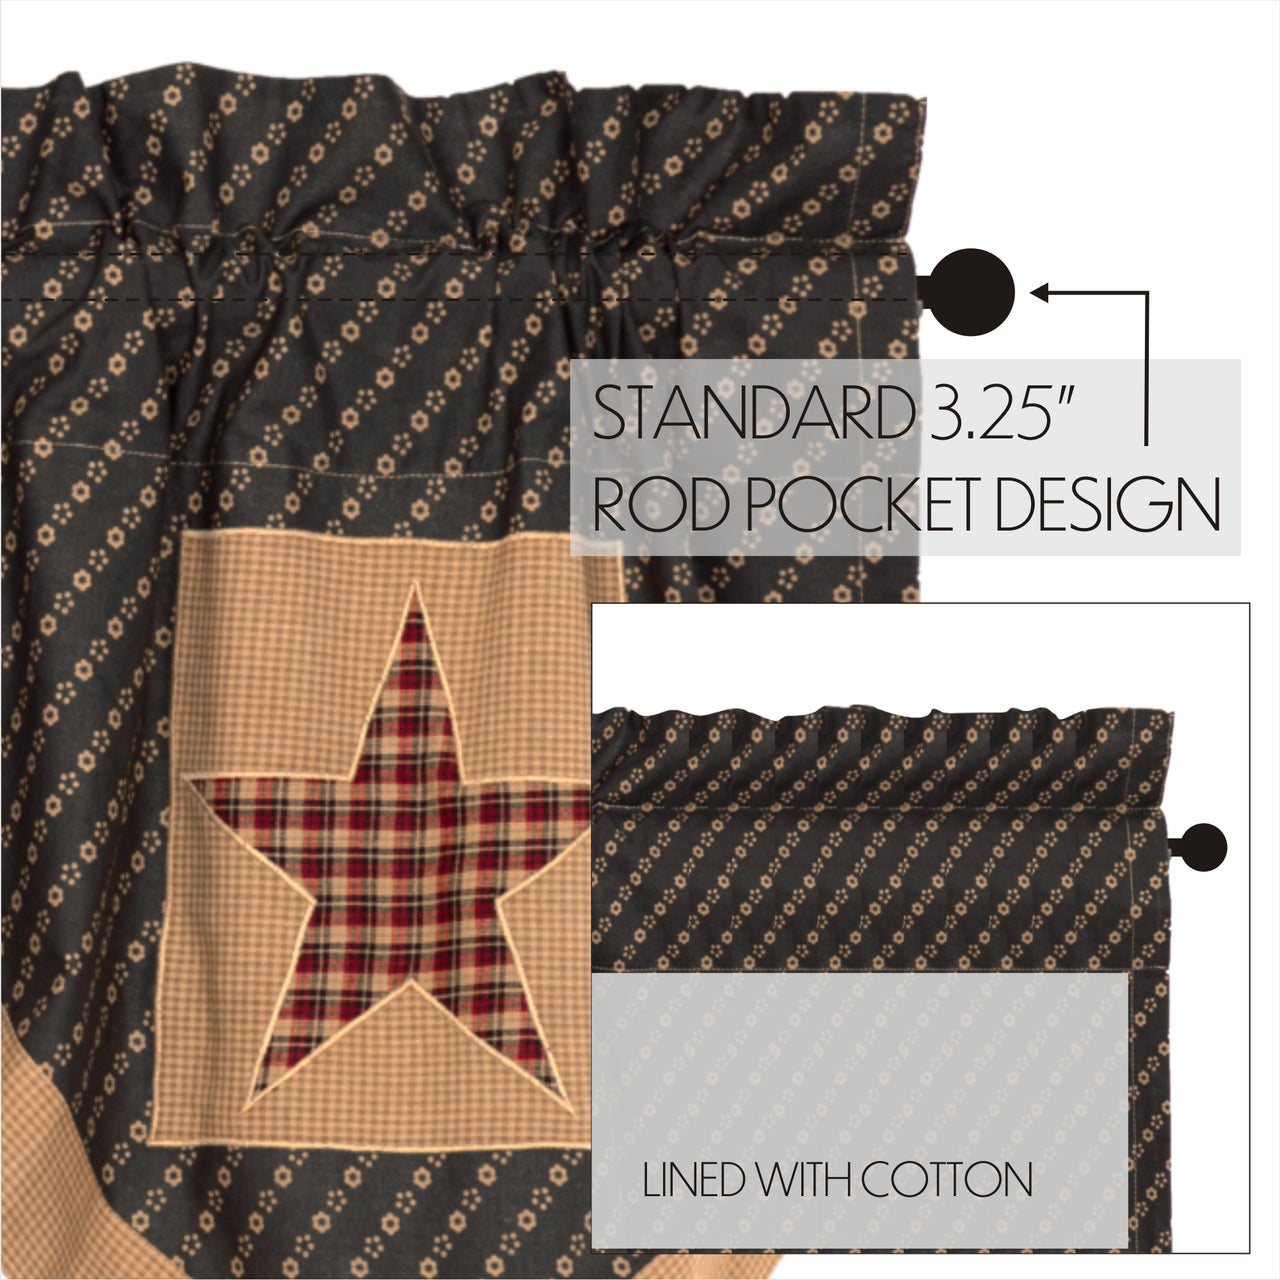 Patriotic Patch Star Block Valance Curtain Pleated Deep Red, Khaki, Navy VHC Brands